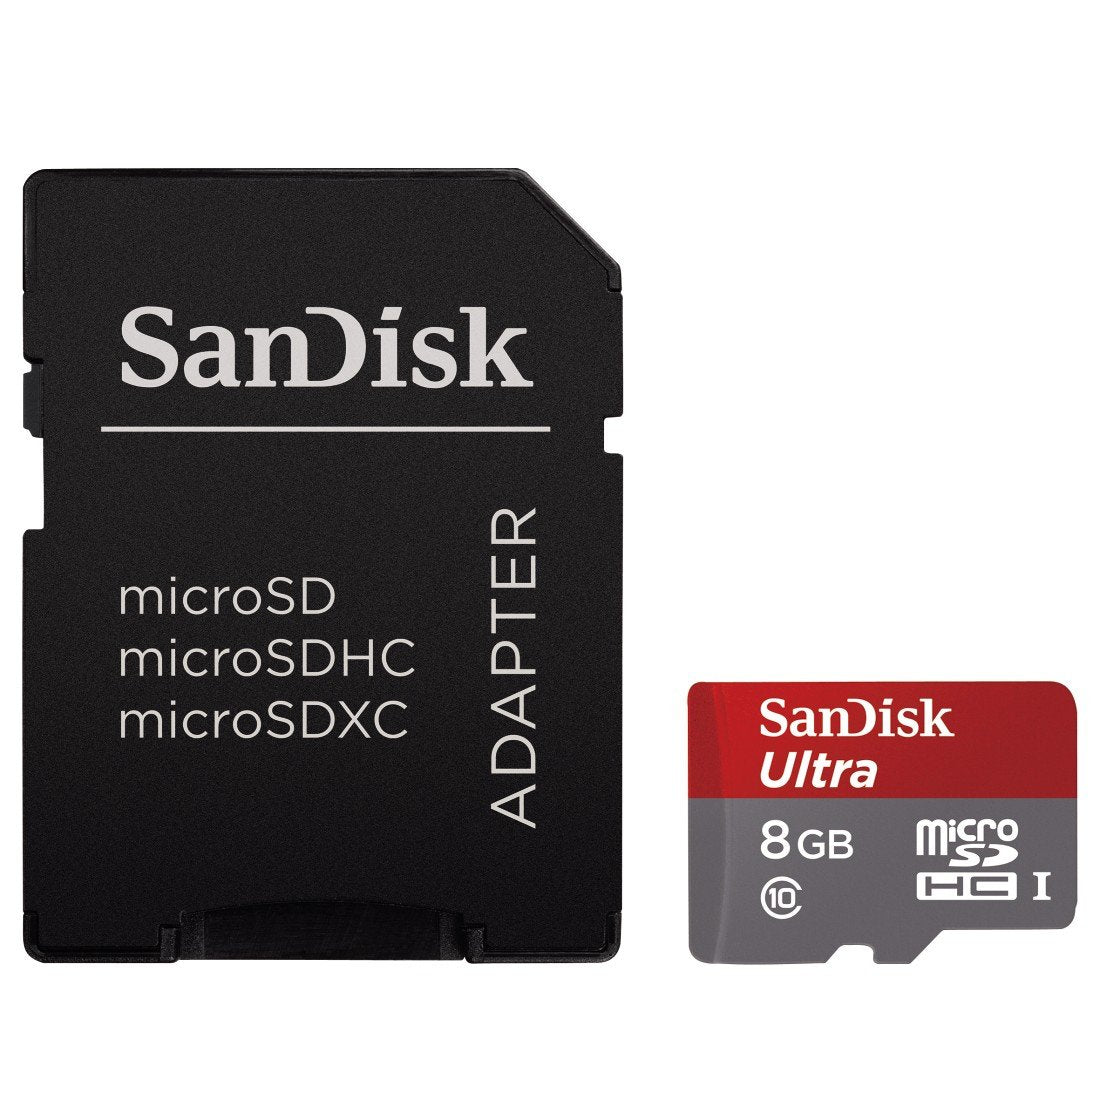 SanDisk Ultra 8GB Class 10 UHS-I MicroSDHC Memory Card with Adapter, Grey / Red, Standard Packaging (SDSDQUAN-008G-G4A)